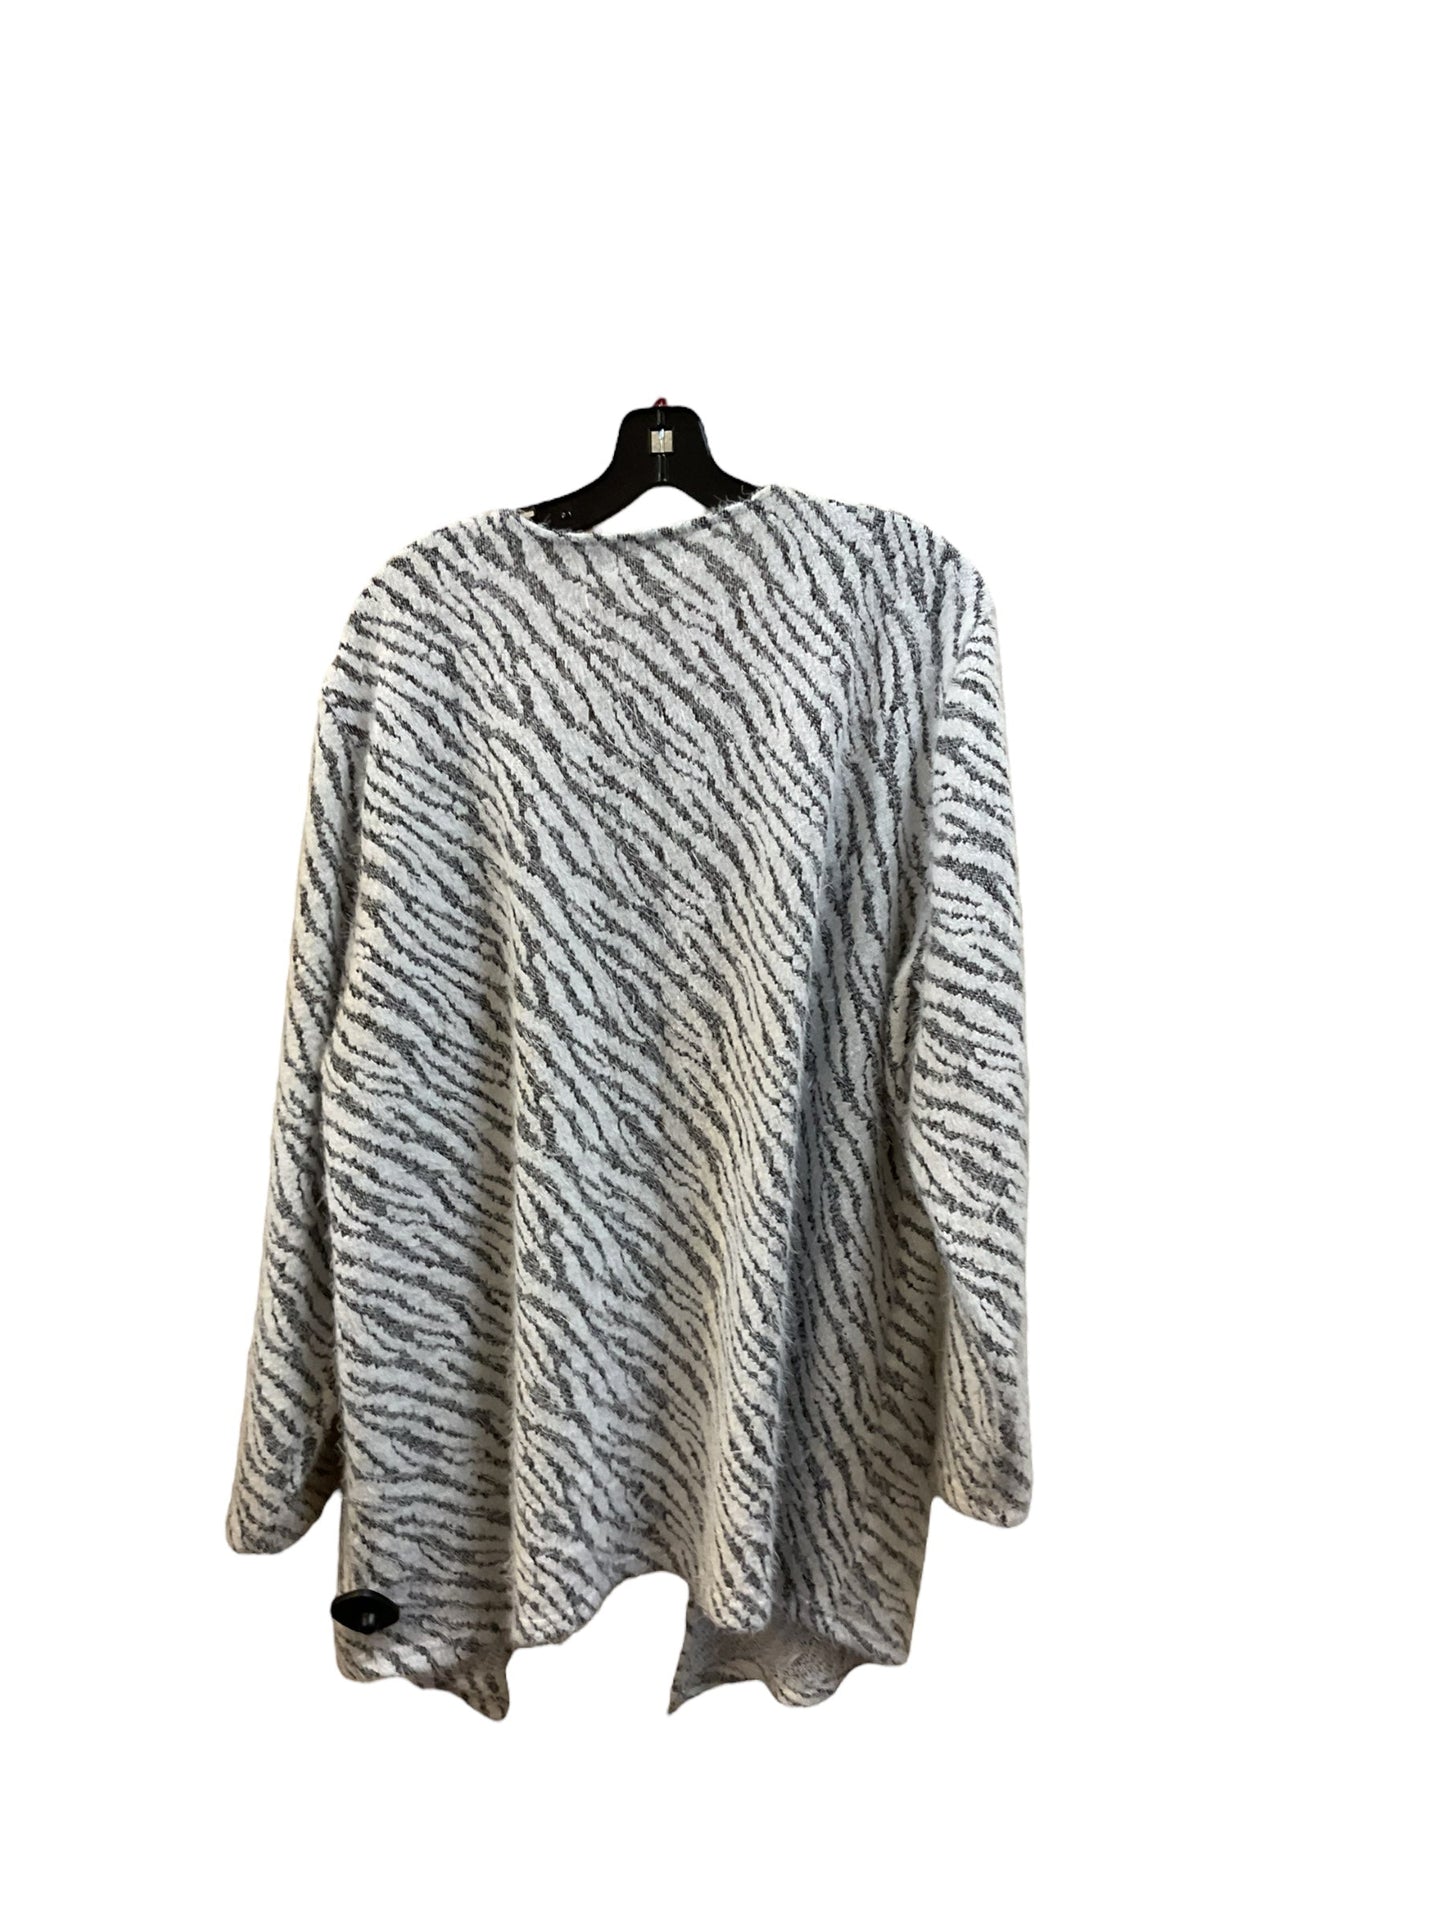 Sweater Cardigan By Maurices  Size: 2x